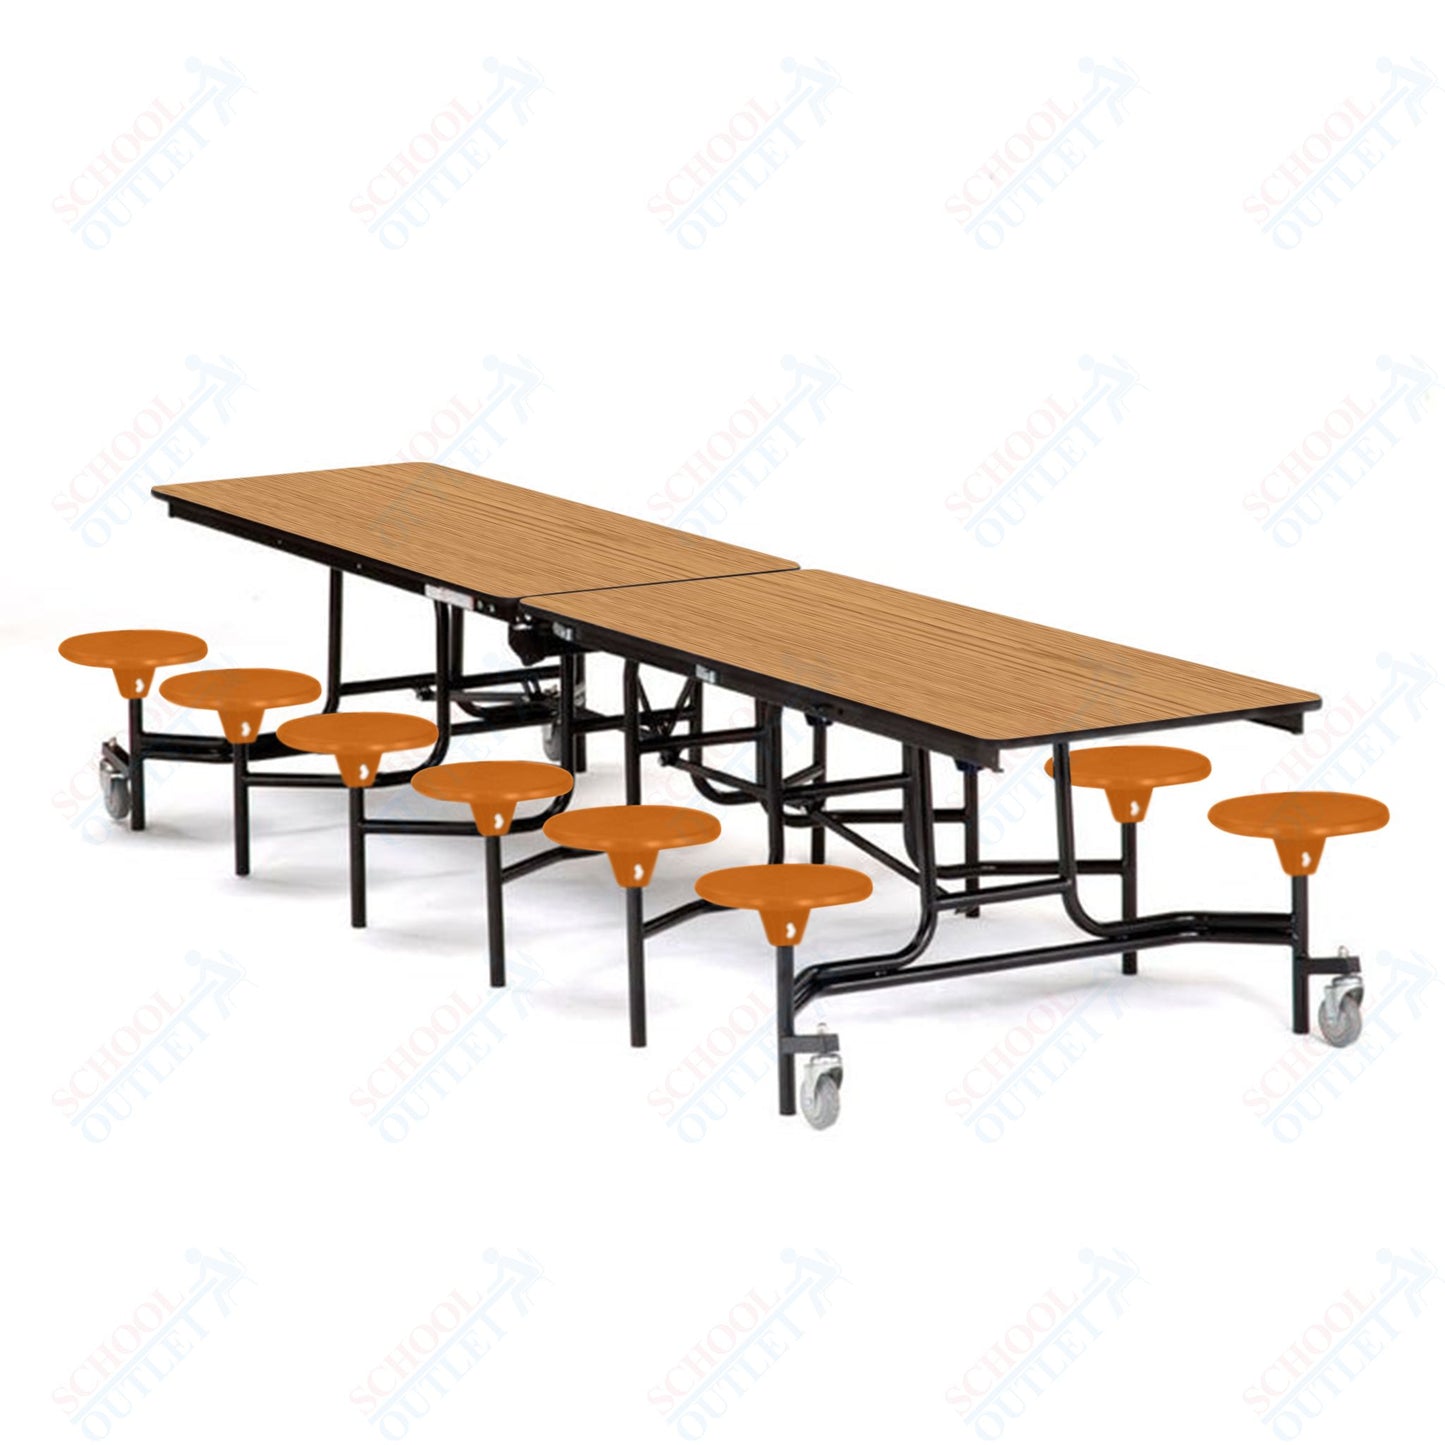 Mobile Cafeteria Lunchroom Stool Table - 30" W x 12' L - 12 Stools - MDF Core - Protect Edge - Black Powdercoated Frame